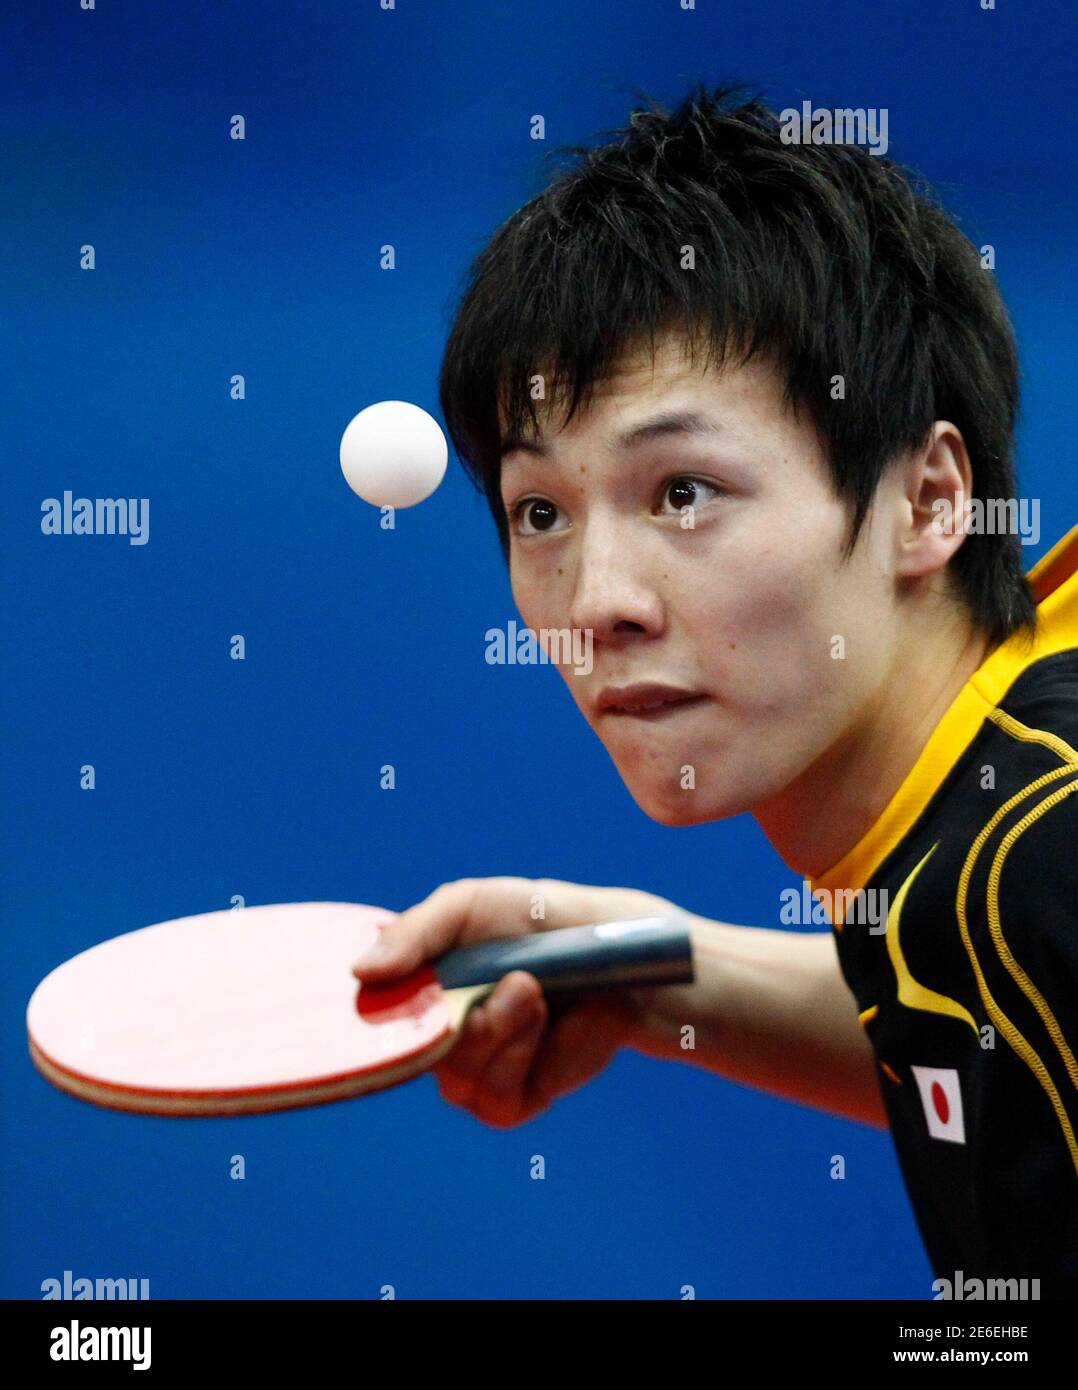 Kenta Matsudaira of Japan eyes the ball as he serves during his men's doubles table tennis match against China's Ma Lin and Xu Xin at the 16th Asian Games in Guangzhou, Guangdong province, November 19, 2010. REUTERS/Jason Lee (CHINA  - Tags: SPORT TABLE TENNIS) Stock Photo